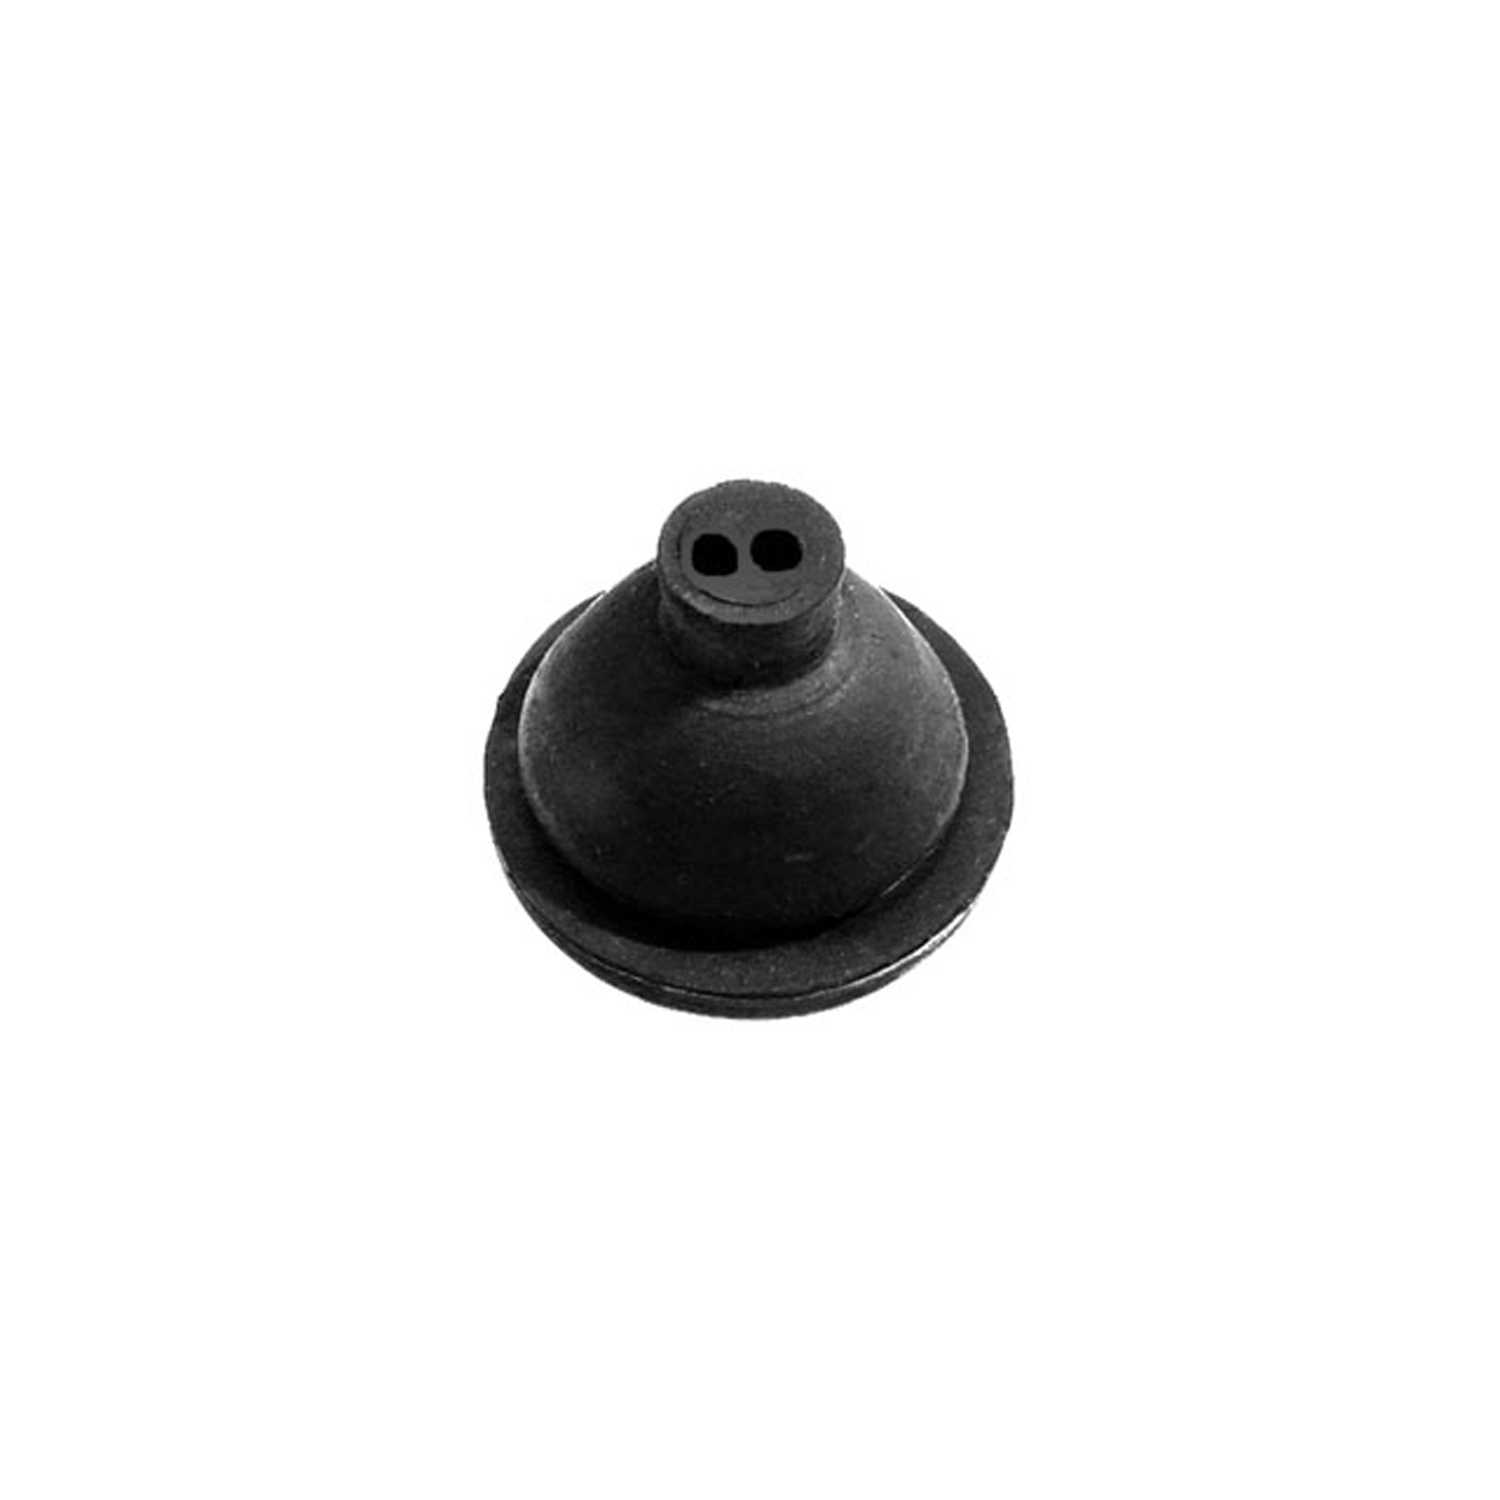 1972 Chevrolet G30 Van Dash  Firewall Grommet.  Double-hole type for two wires-RP 1-G